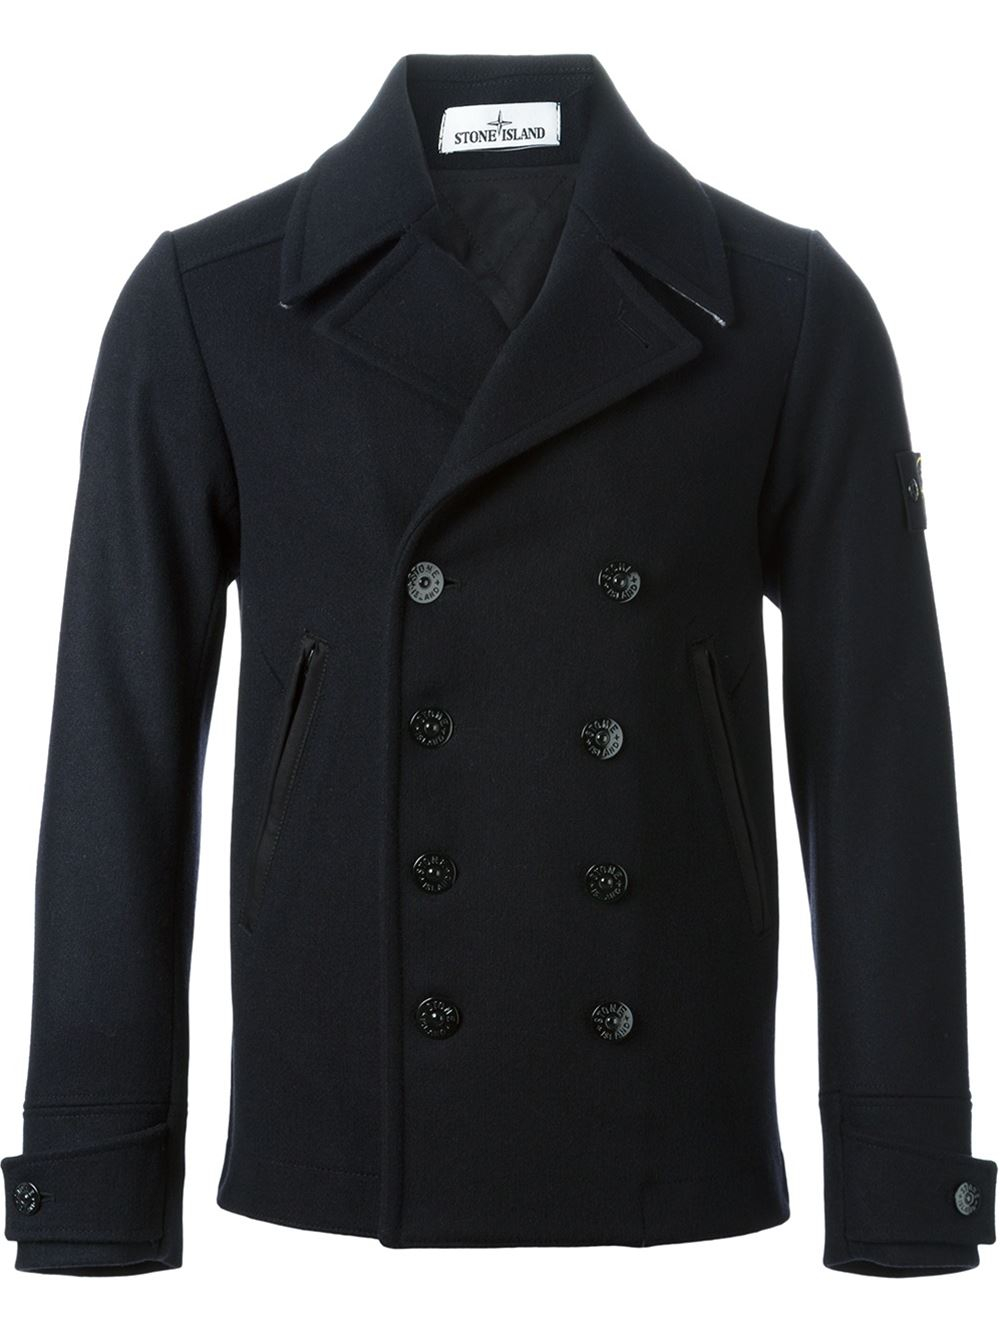 Stone Island Classic Peacoat in Blue for Men - Lyst